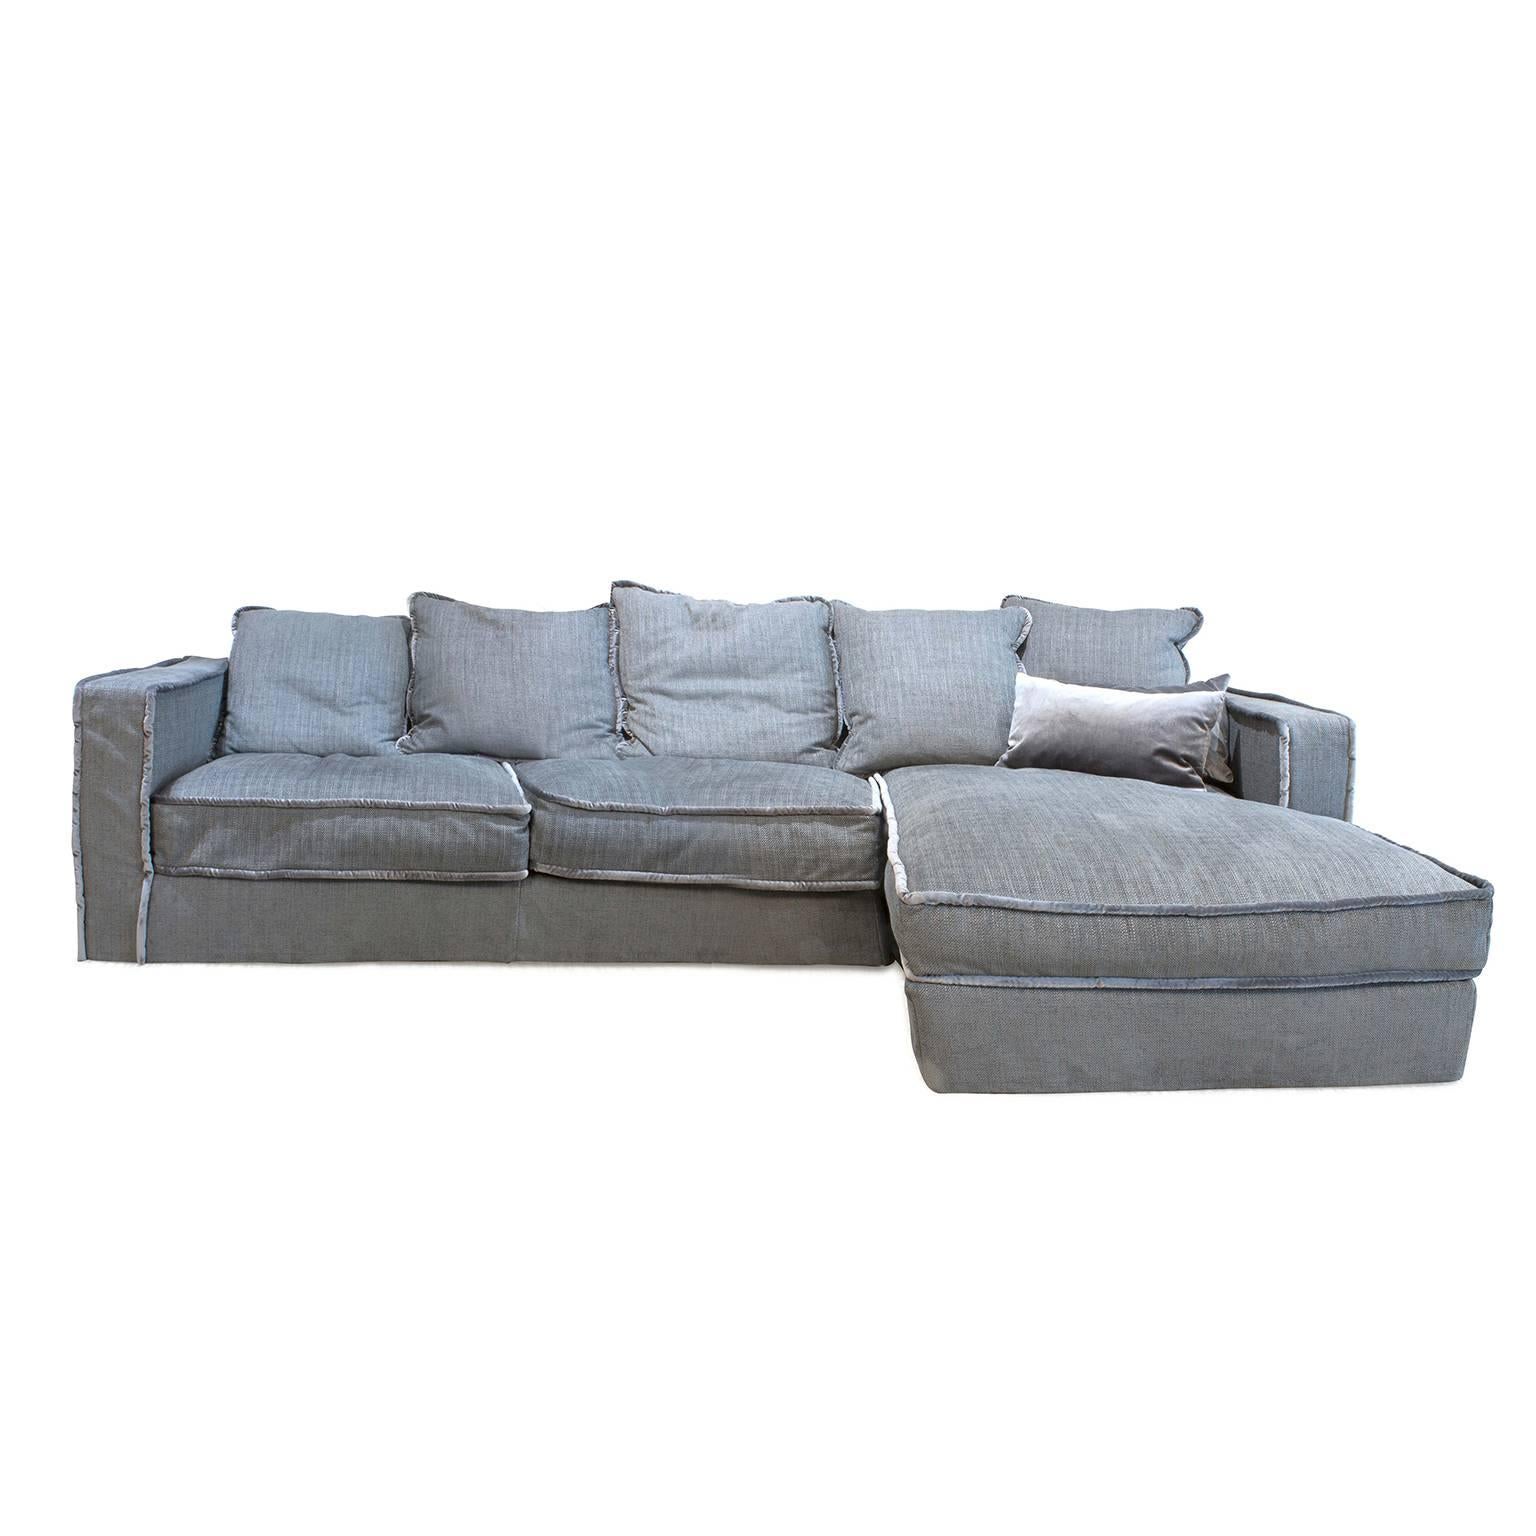 Pillopipe Sofa with Chaise by Paola Navone for Casamilano, Italy For Sale